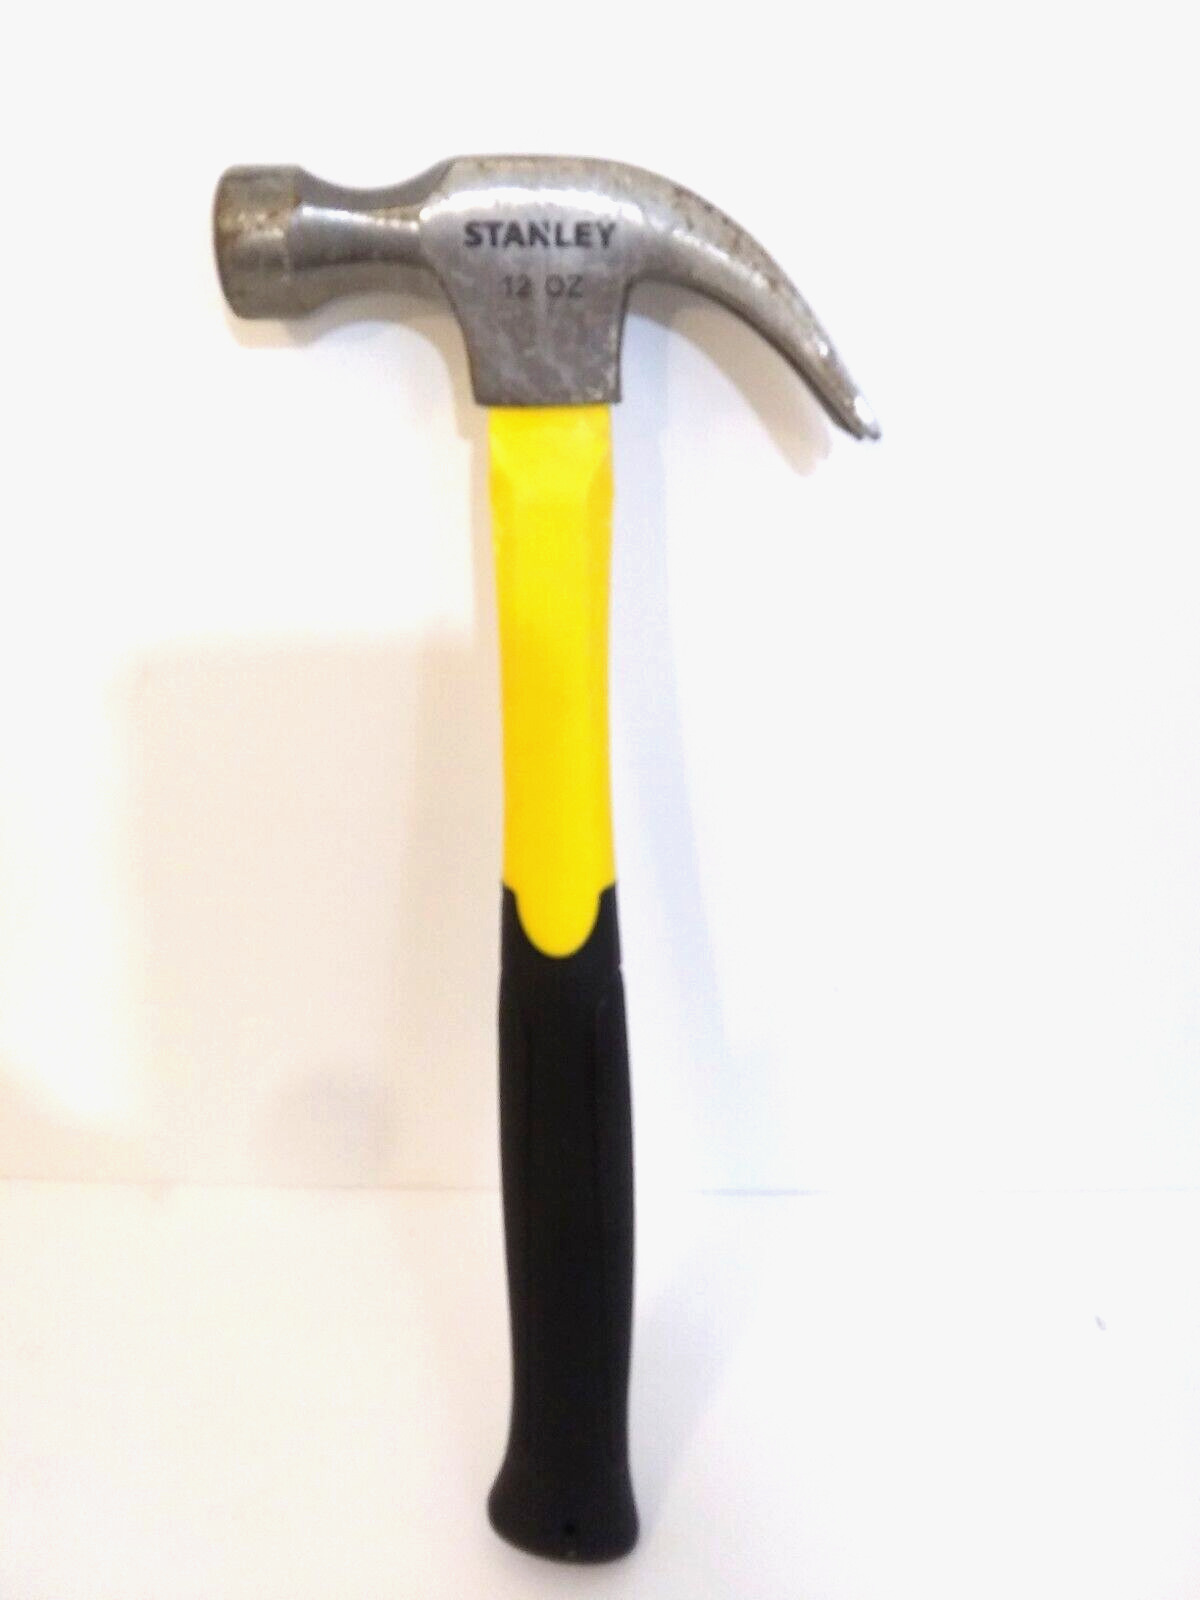 Stanley Claw Hammer Number 12 Oz Yellow Black Rubber Grip Handle Great Condition